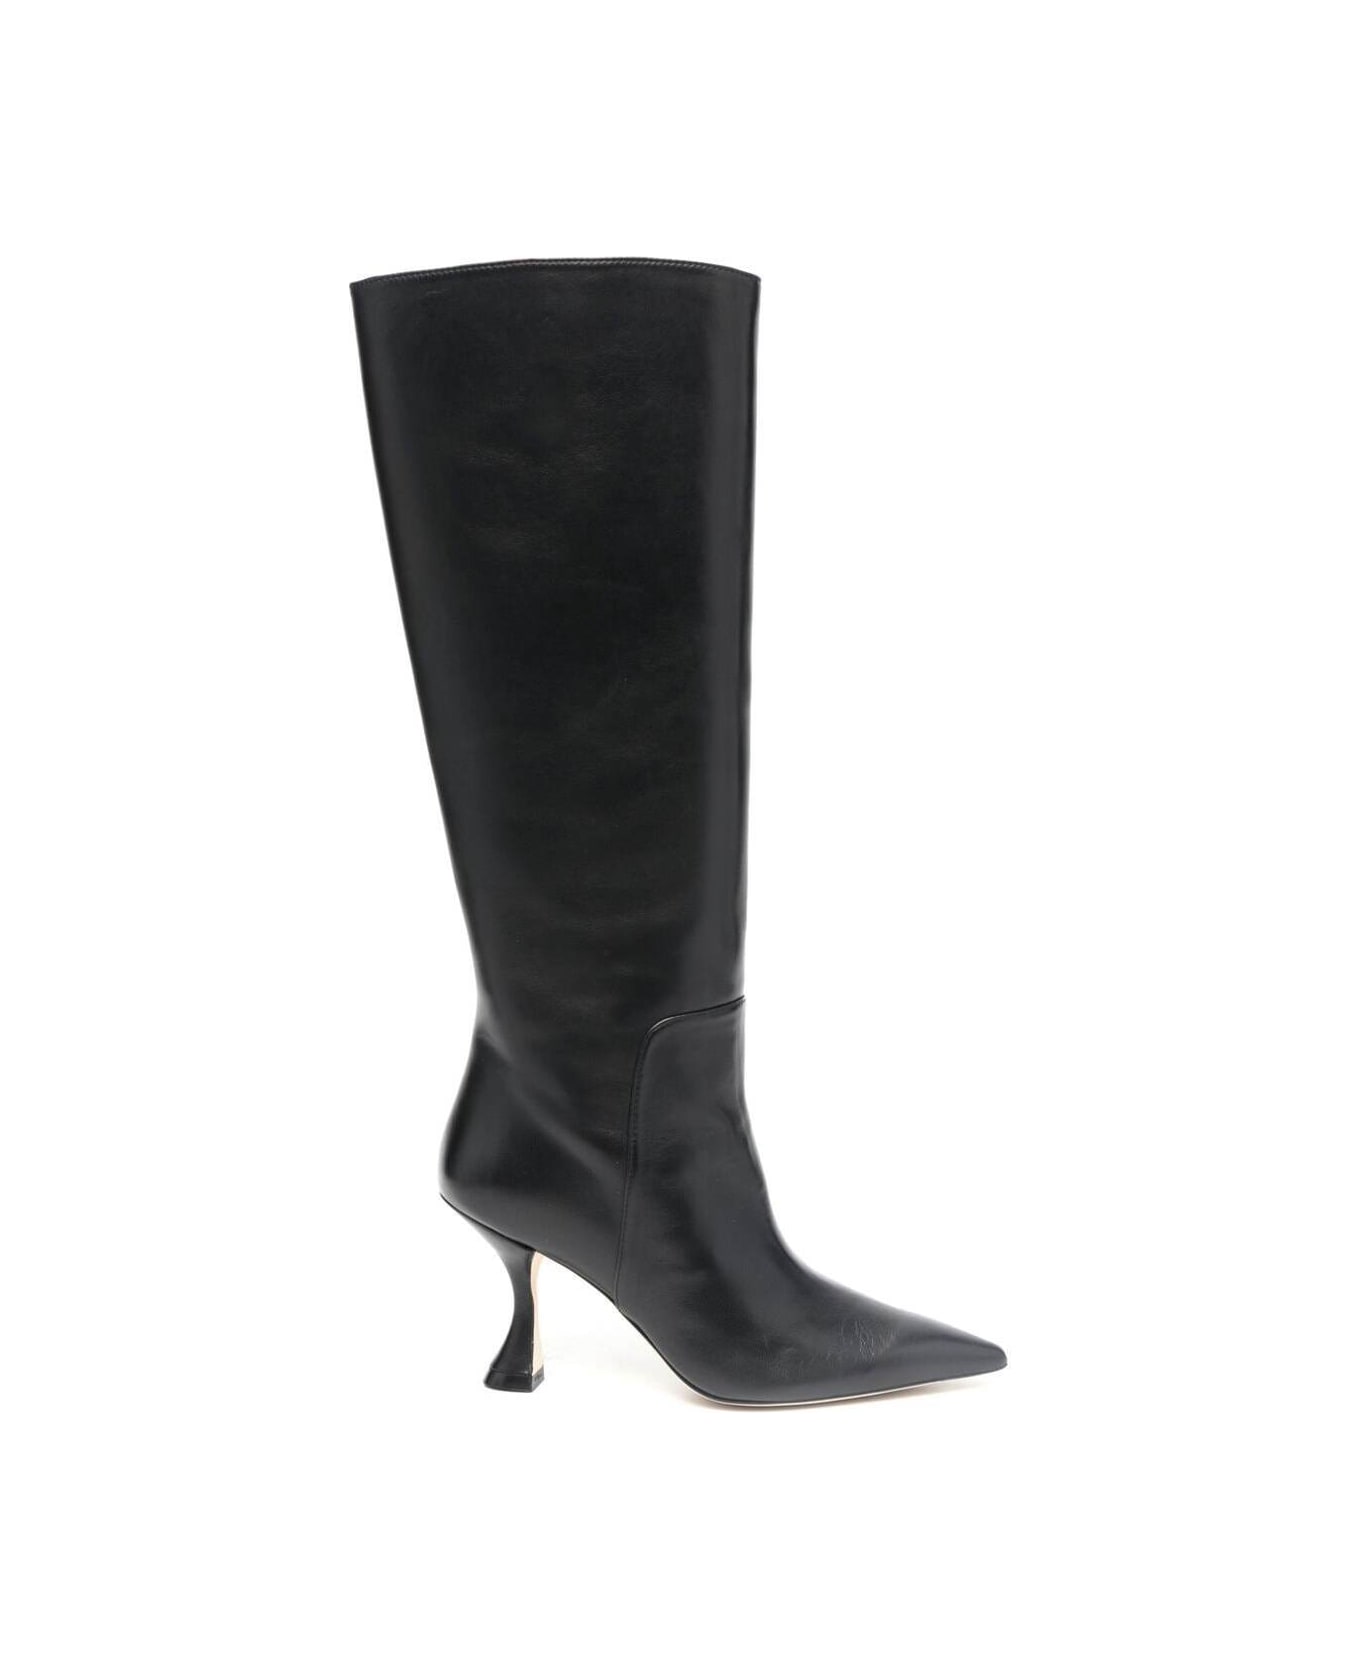 Stuart Weitzman Black Pointed Boots With Spool Heel In Smooth Leather Woman - Black